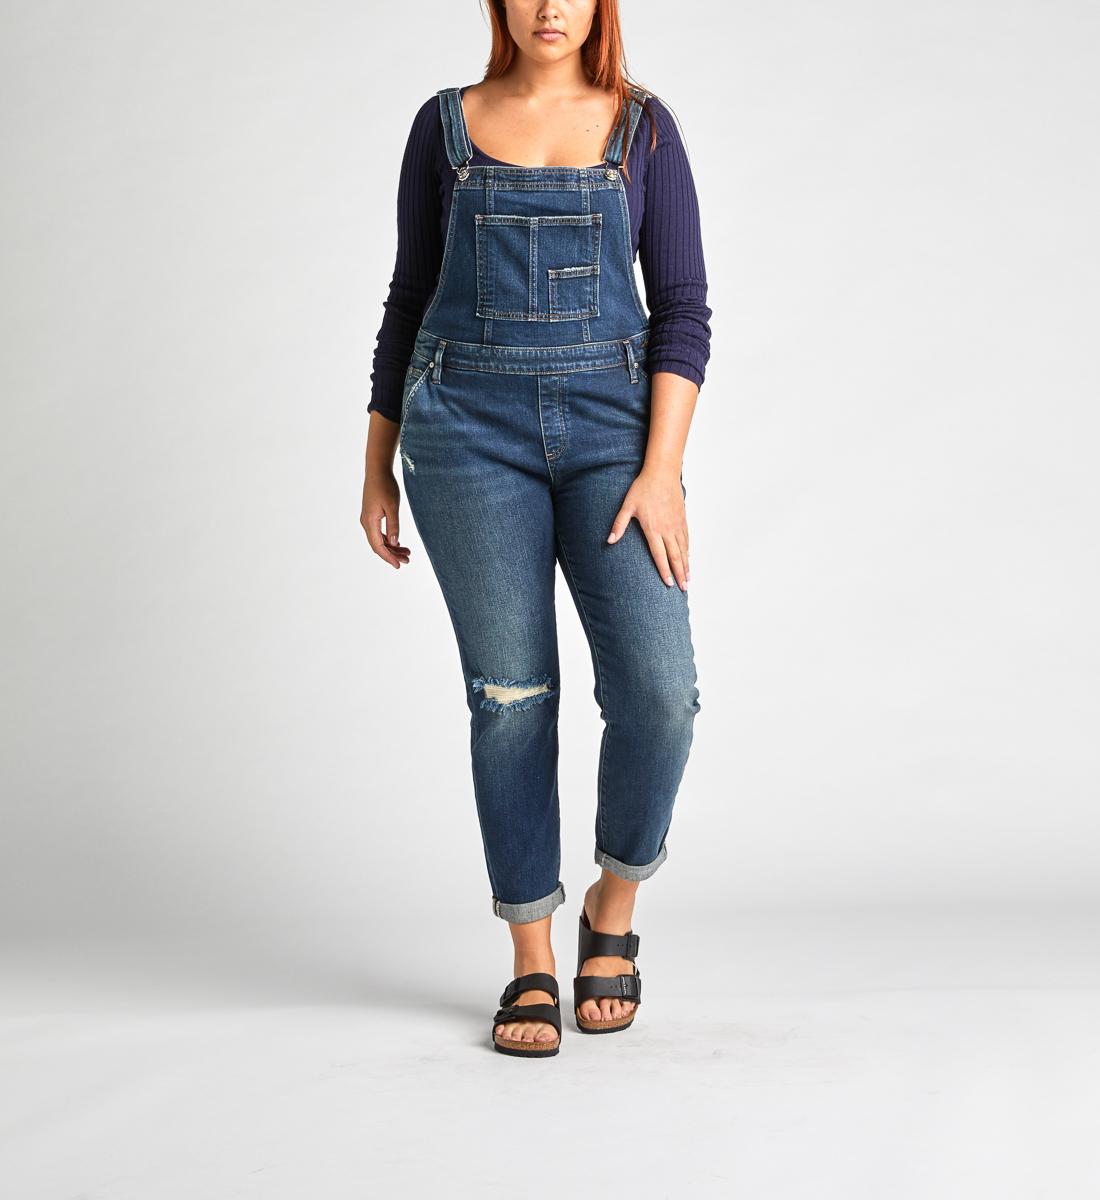 jeans overalls canada